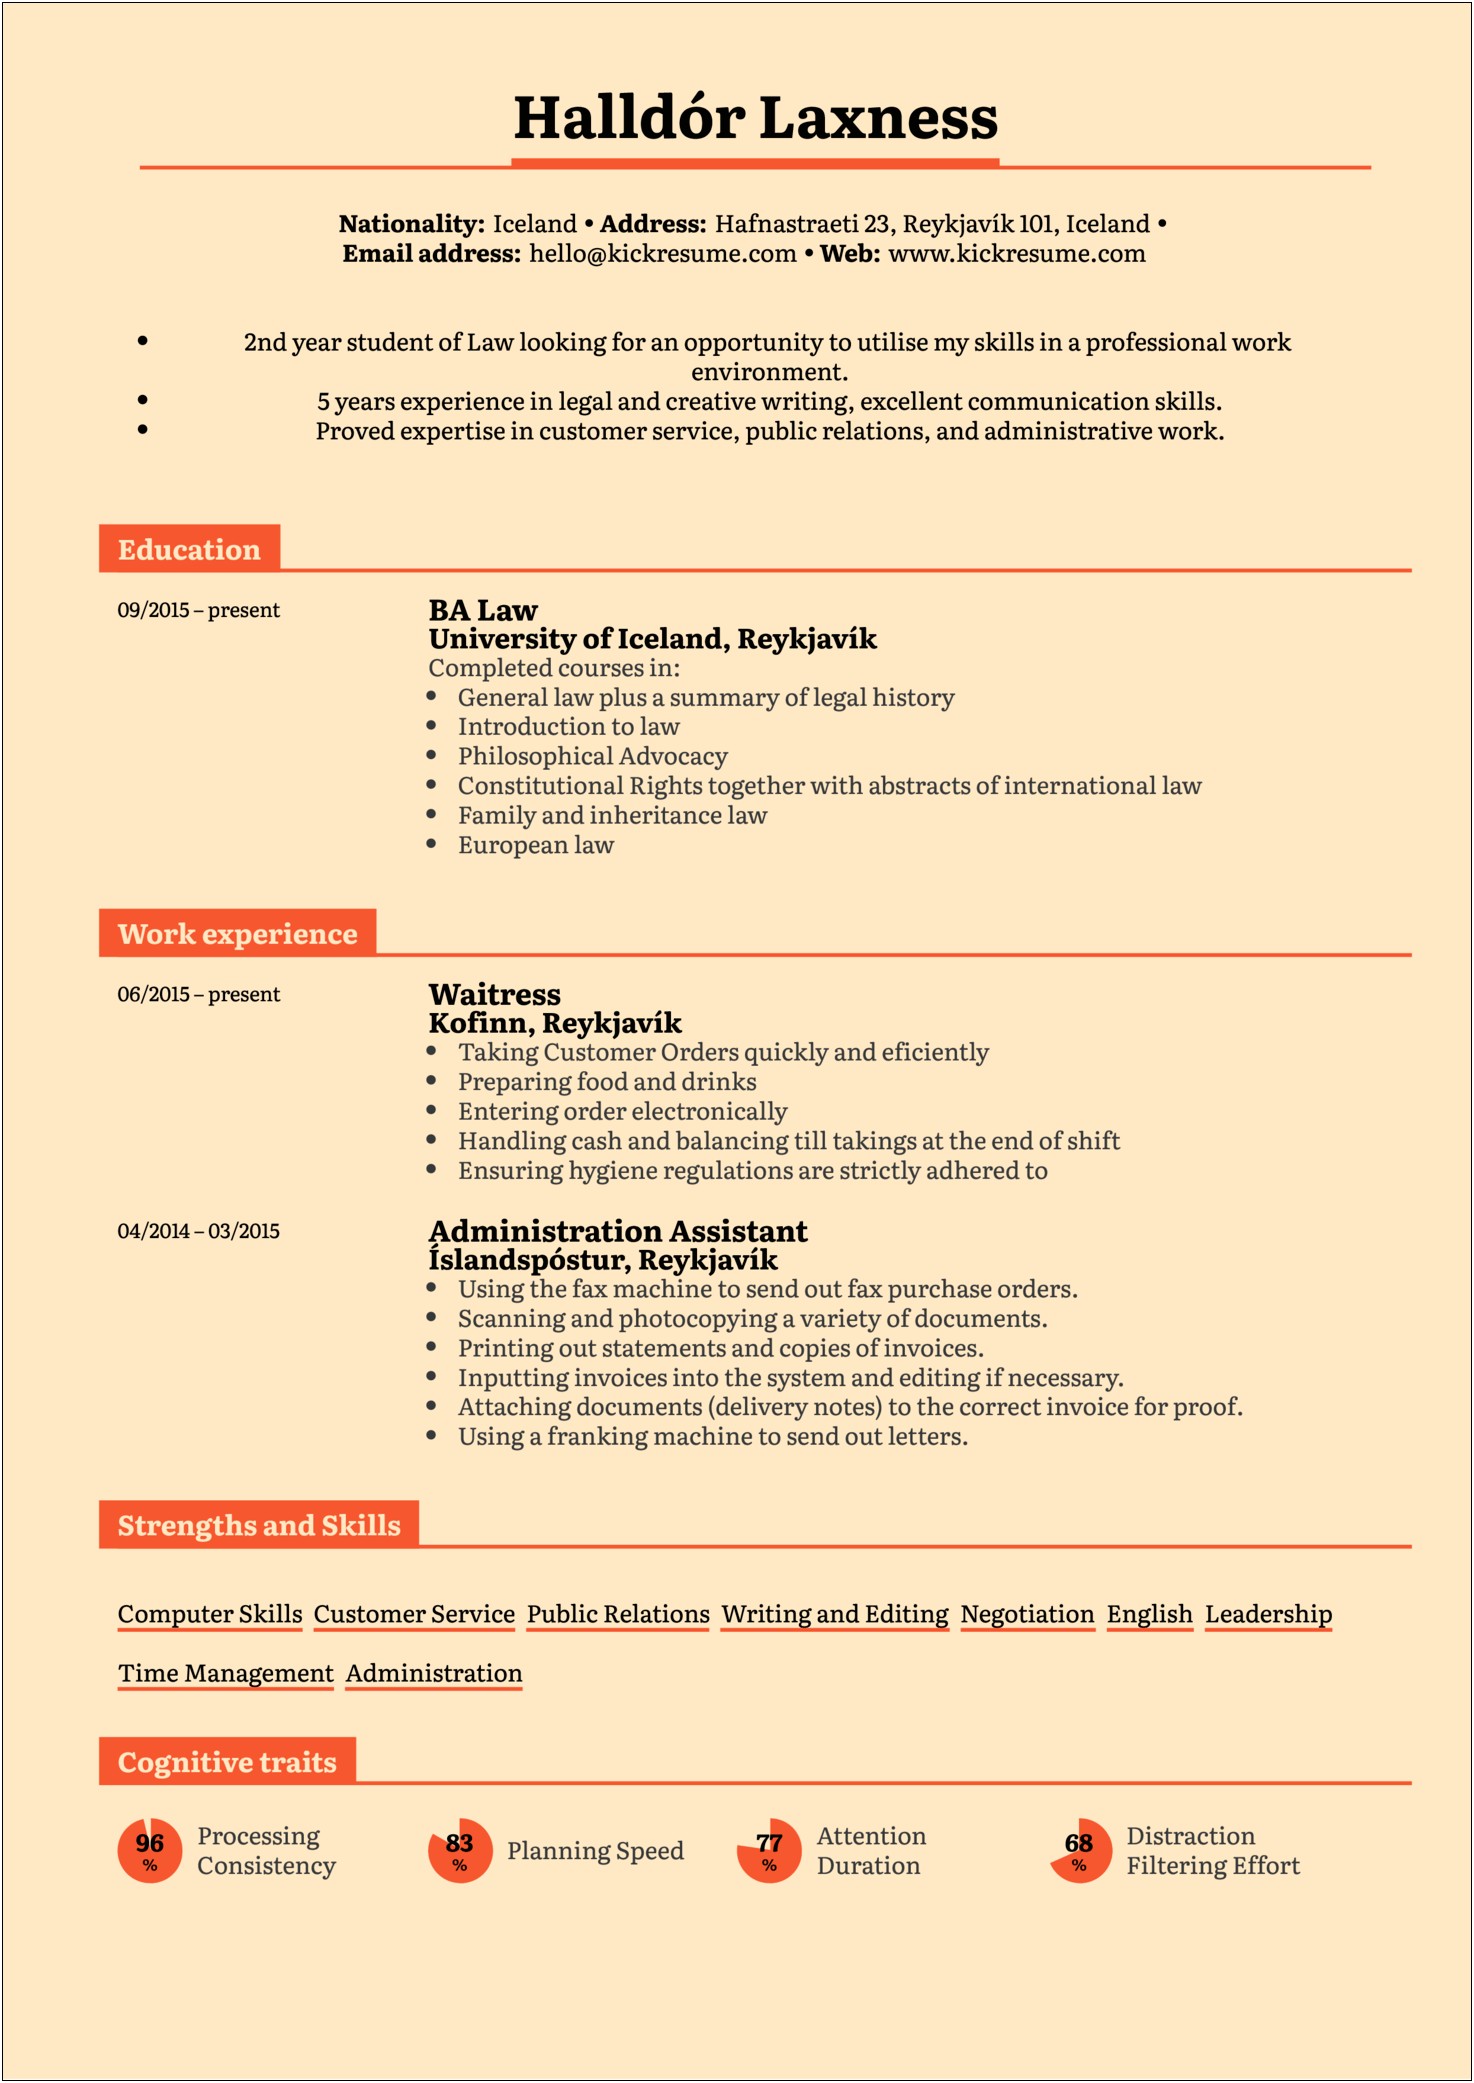 Resume Skills Section Legal Field